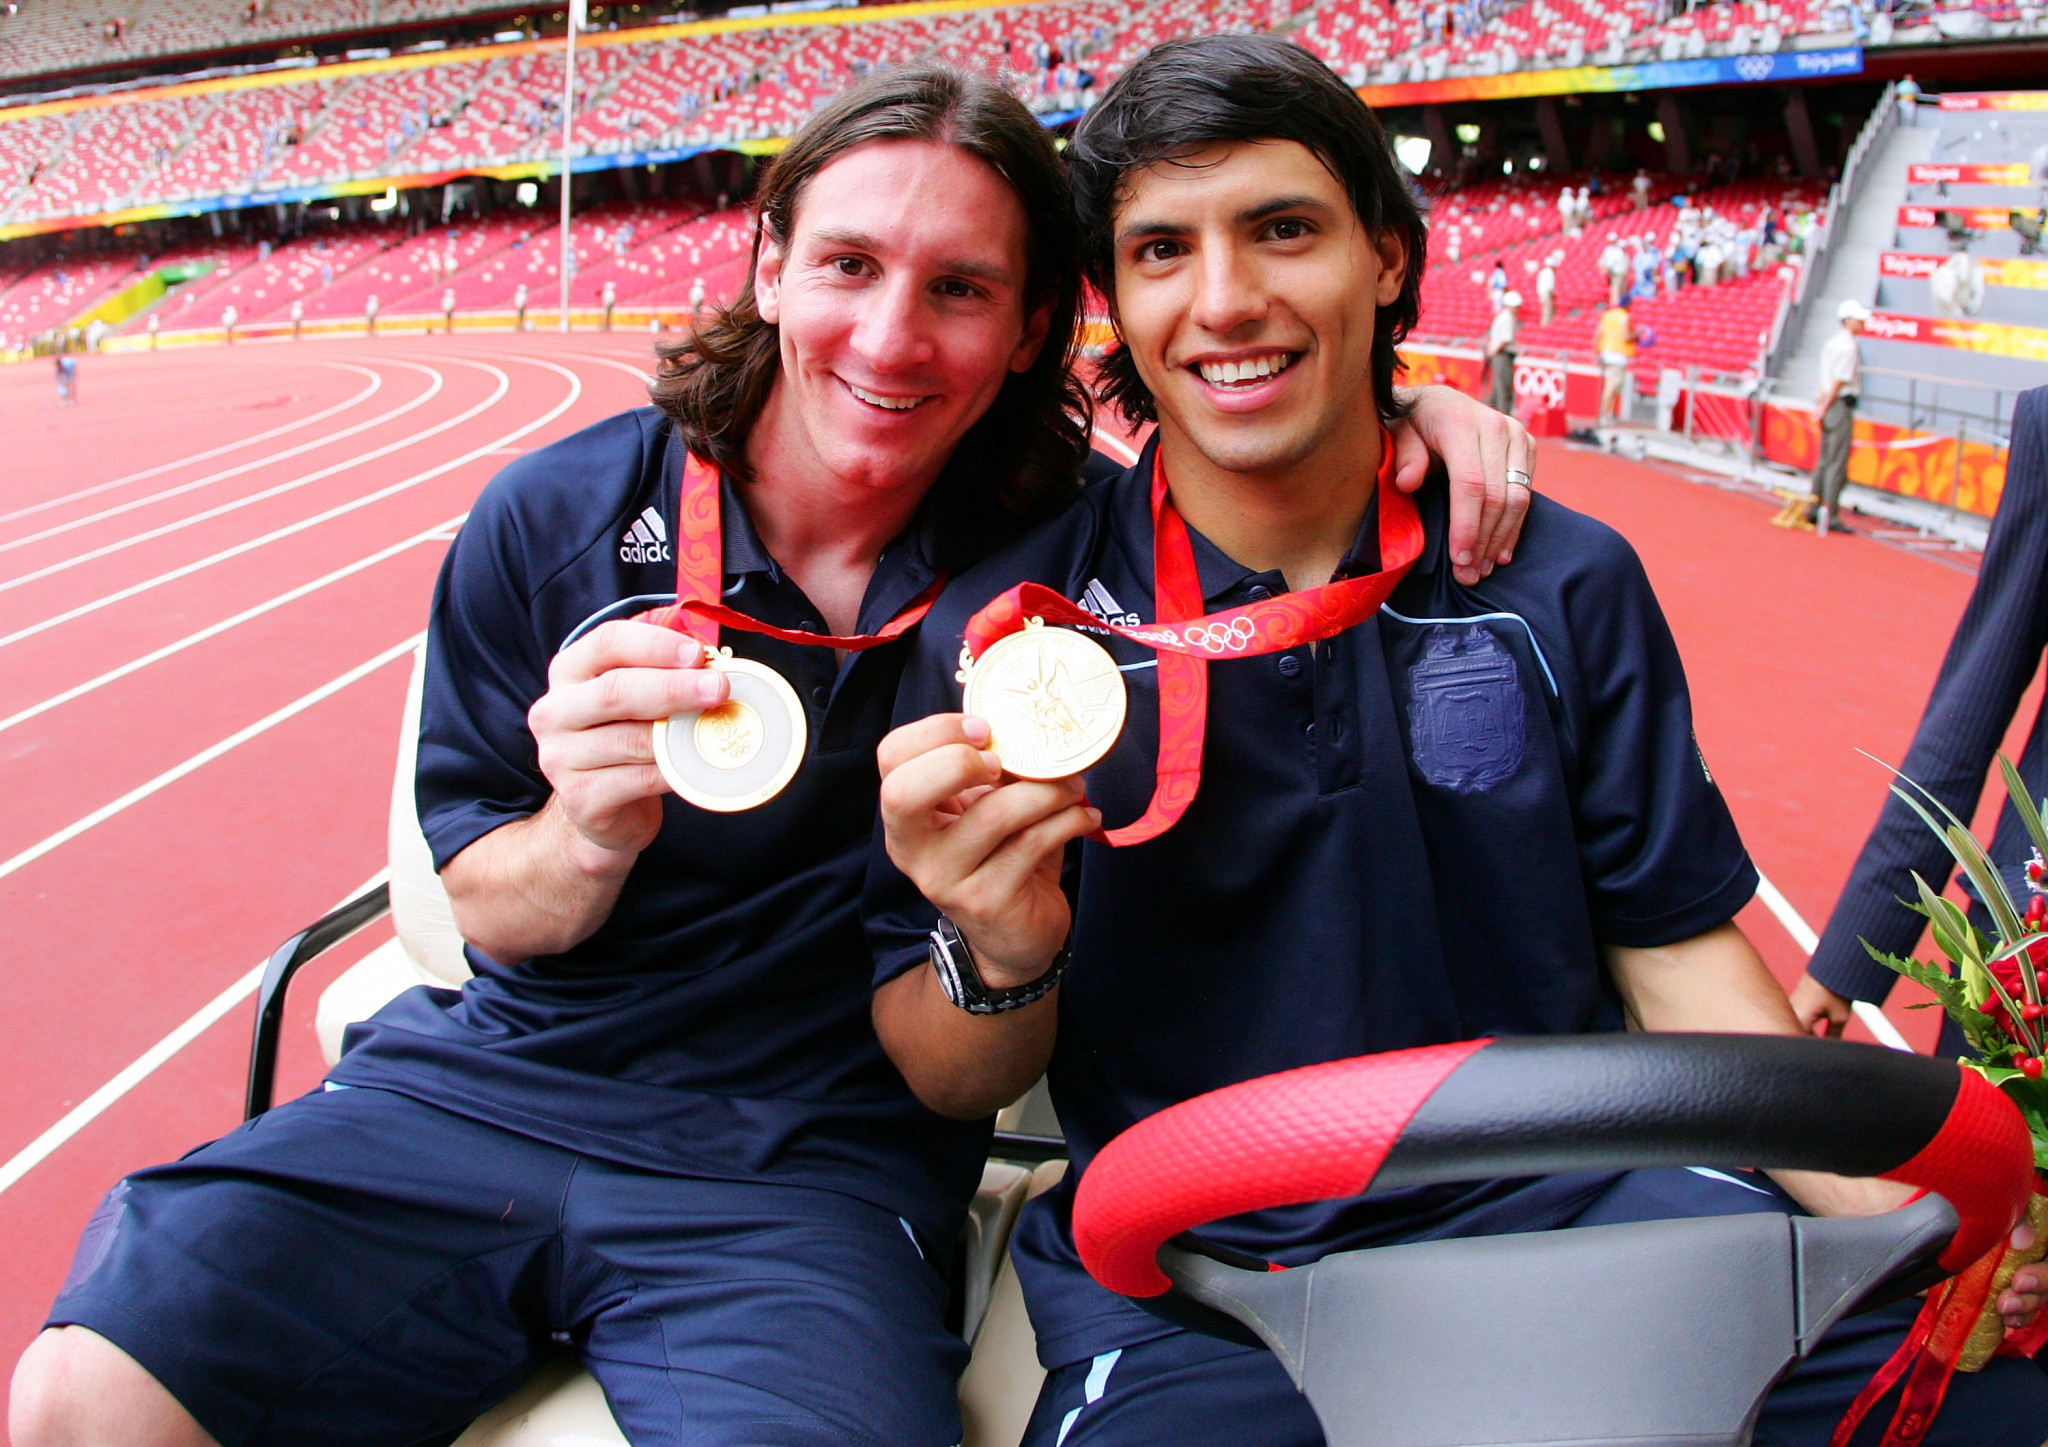 Lionel Messi already has his hands on a gold medal from the 2008 Beijing Olympics. GETTY IMAGES